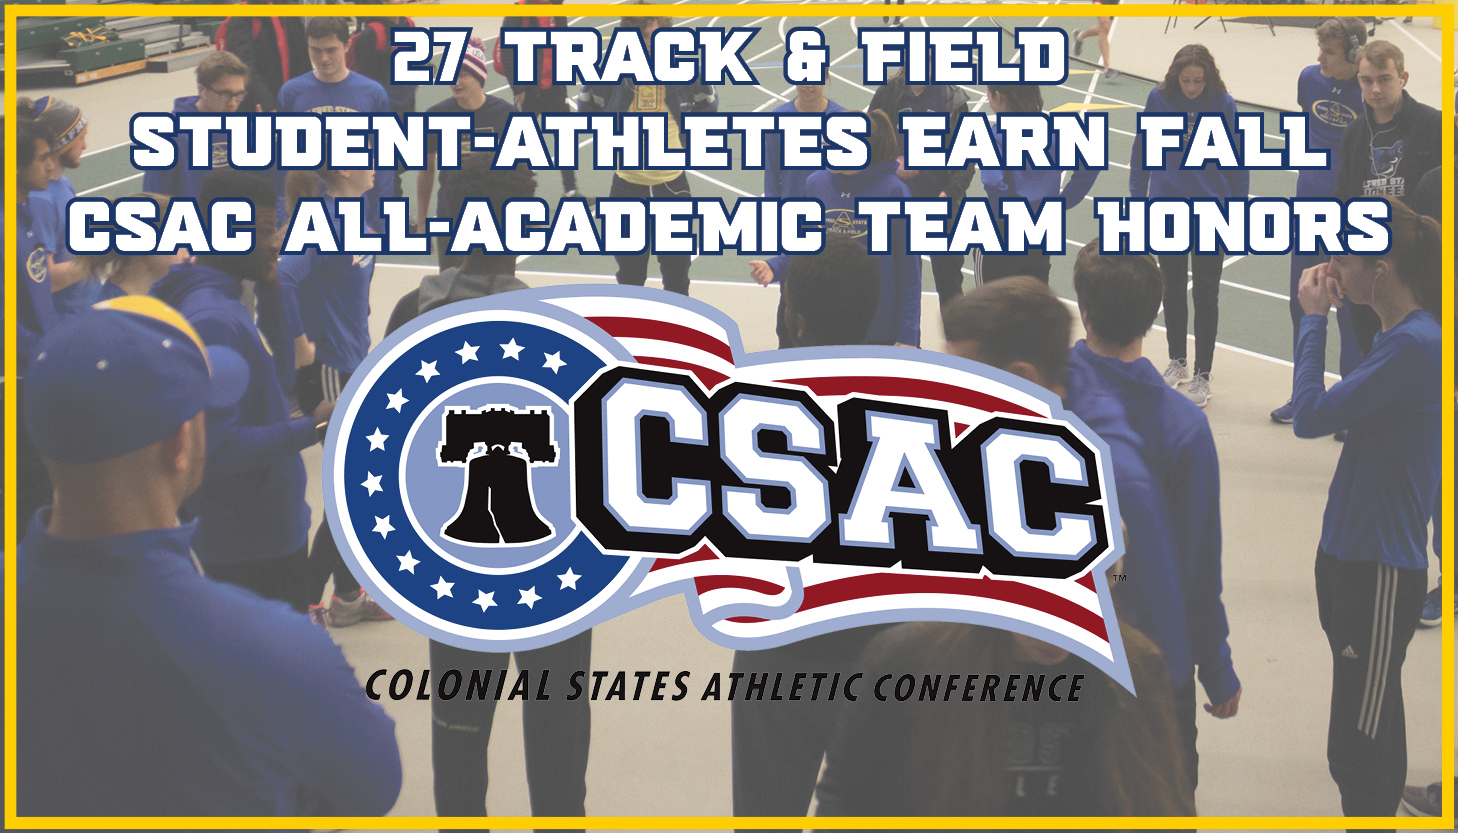 27 members of the track & field team have been named Academic All-CSAC - pictures is a group shot of the team with the CSAC logo.